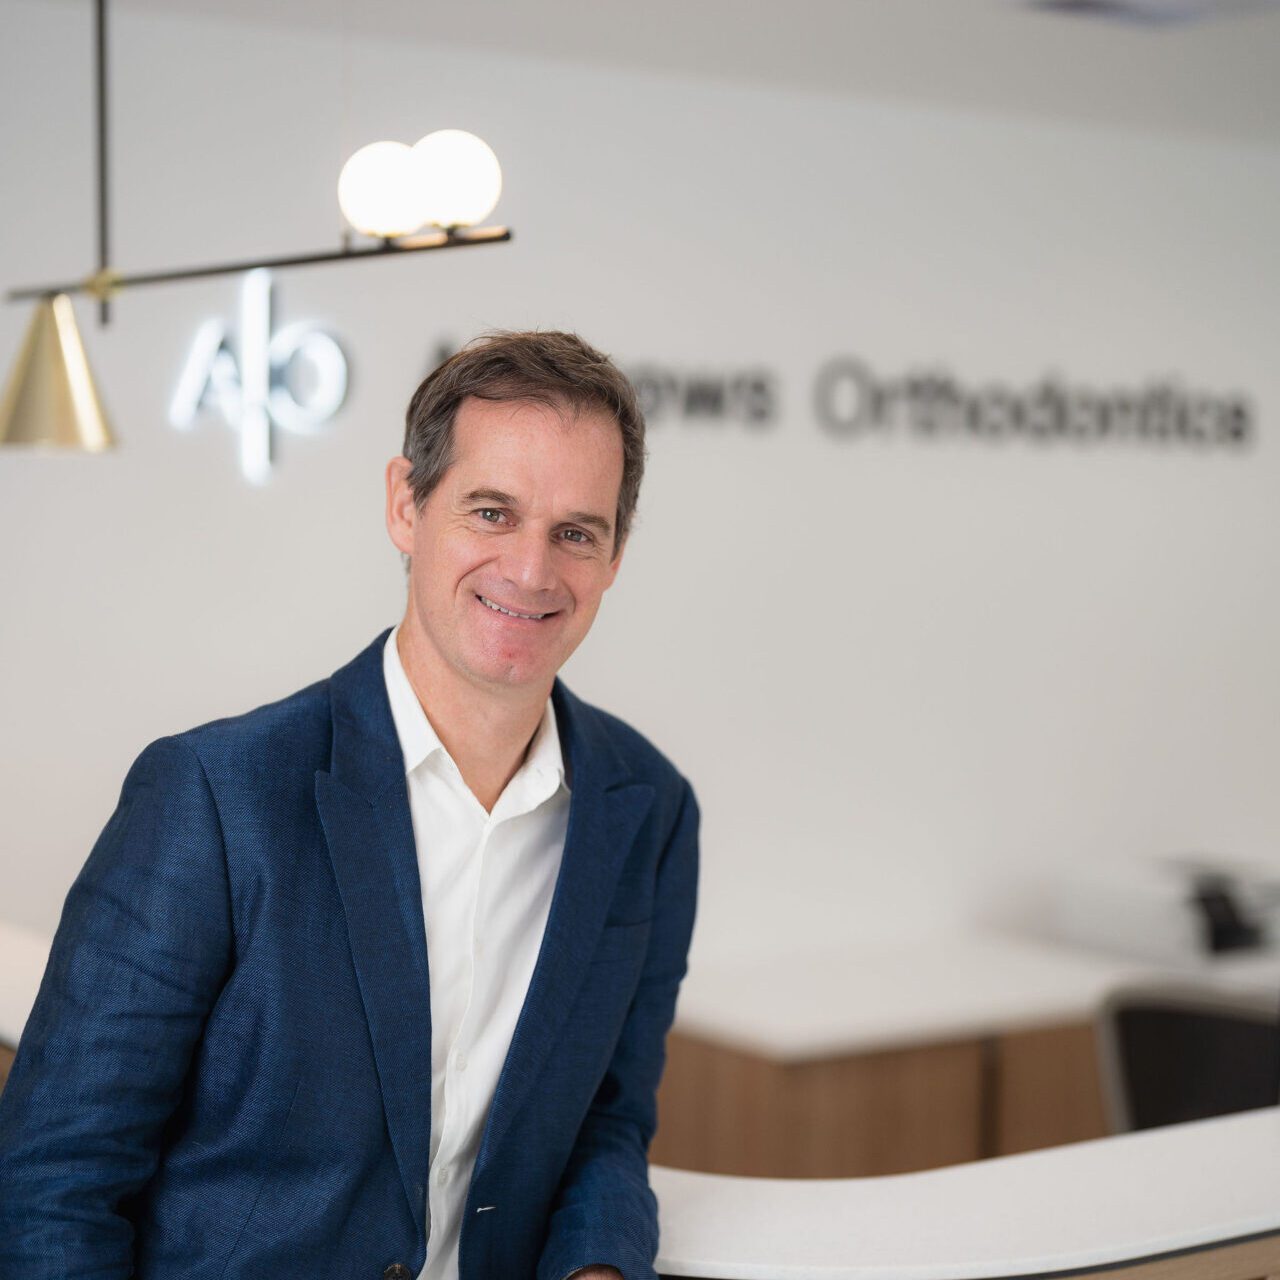 James Andrews a Perth based orthodontist